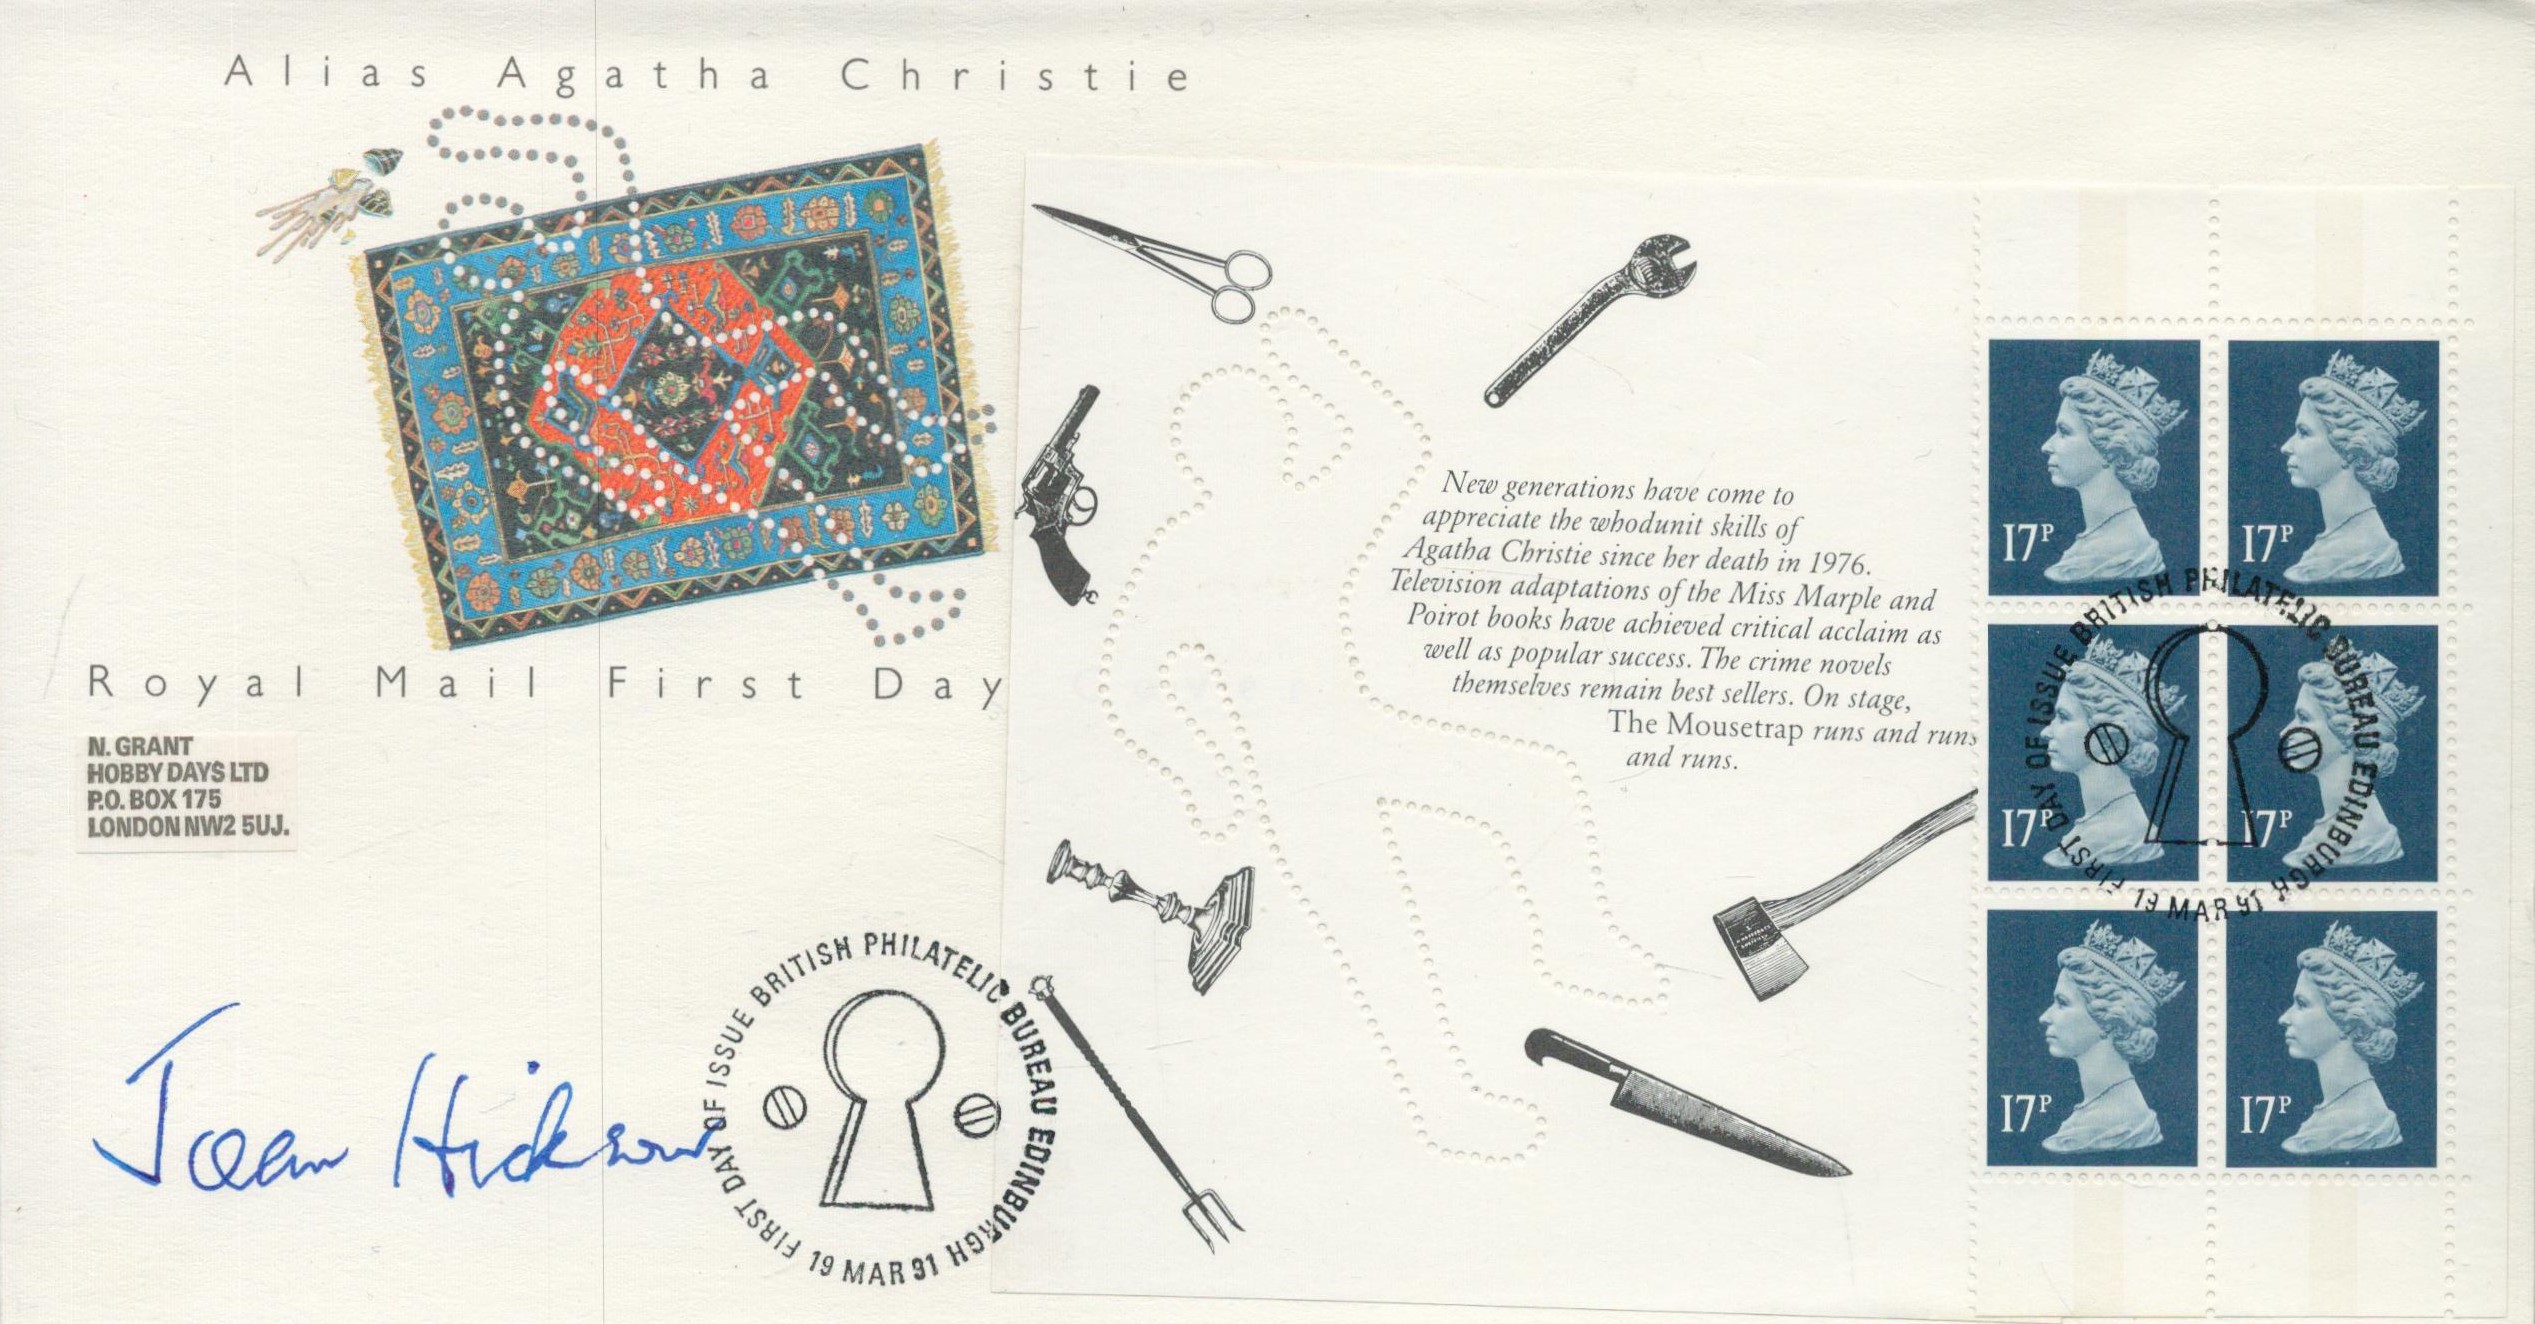 Joan Hickson, a signed 'Alias Agatha Christie' FDC. Fondly remembered for her role as Agatha